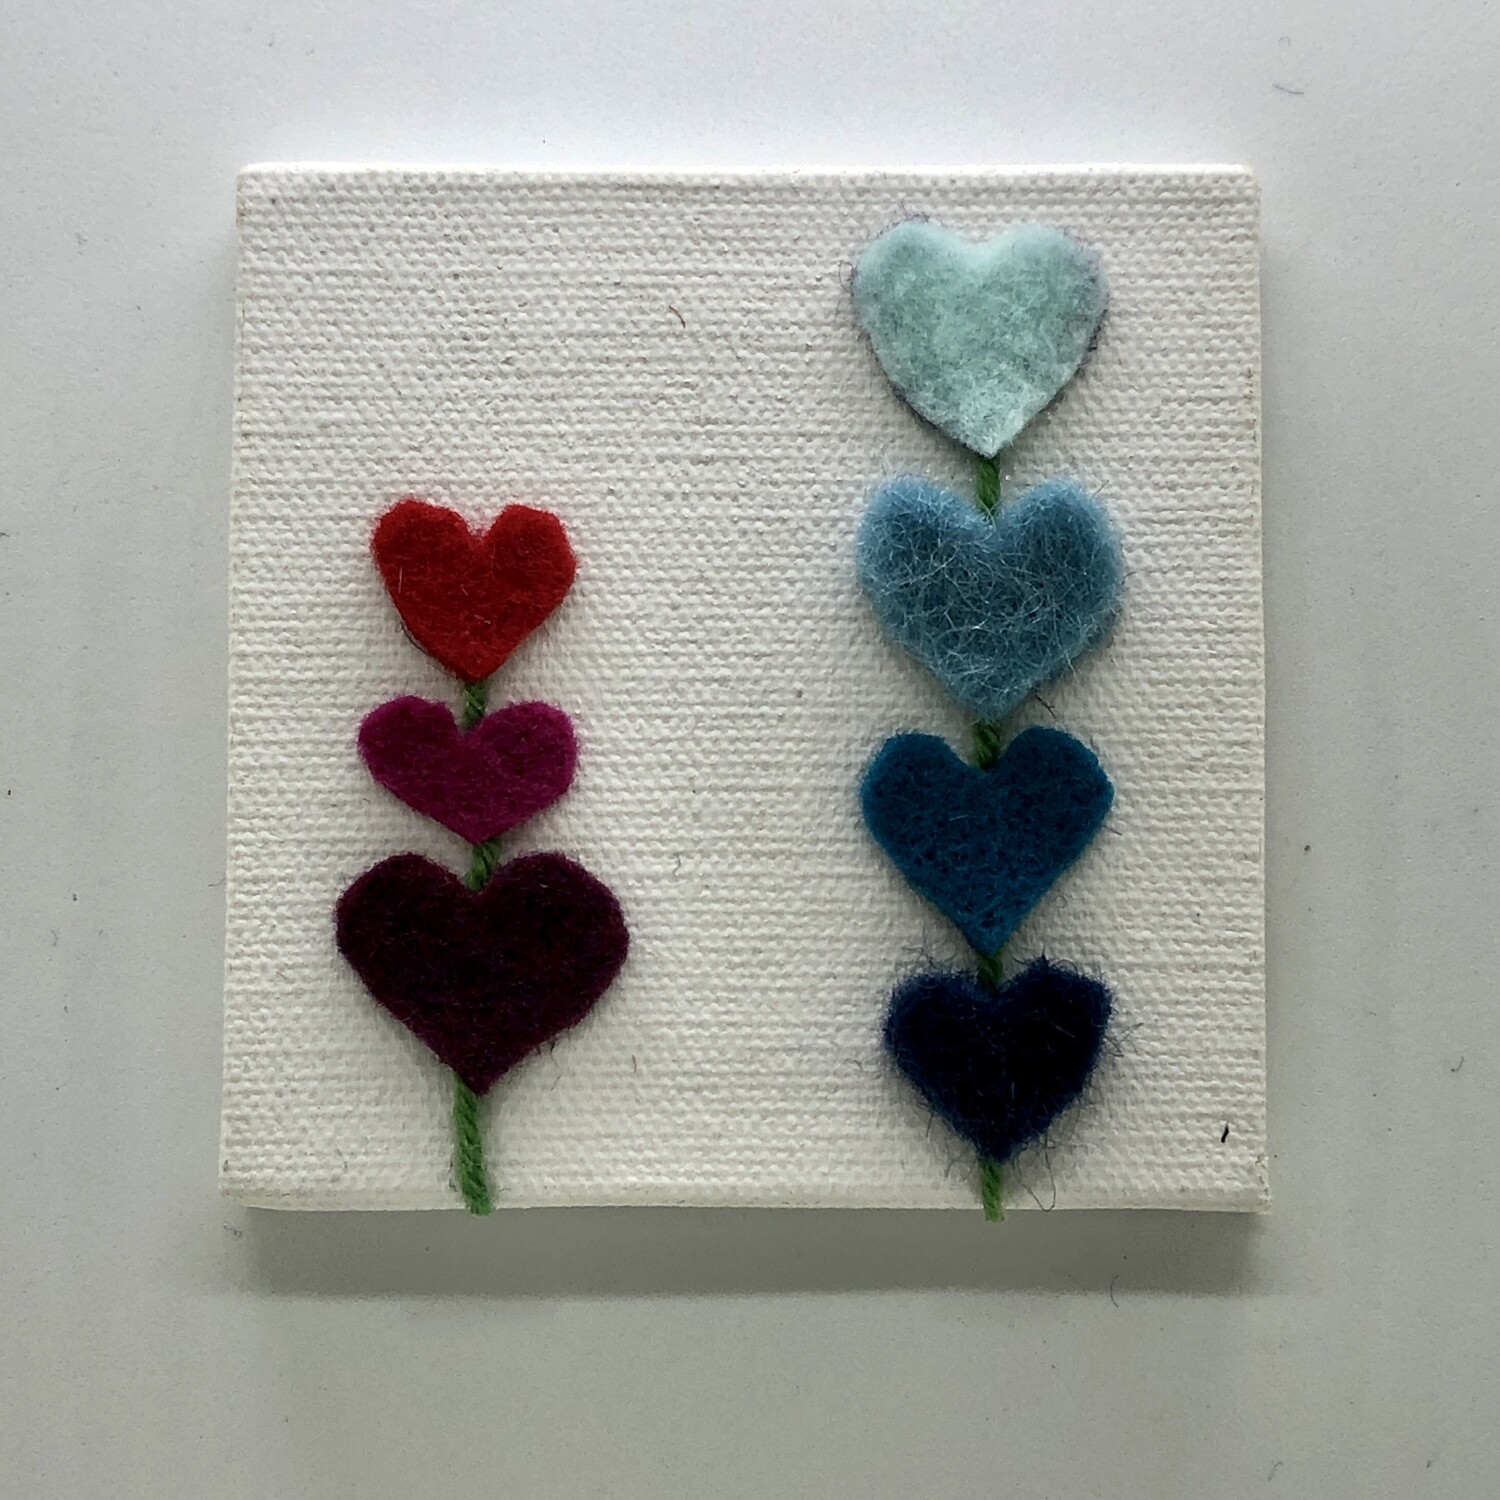 Hearts Stacked Blues and Reds 3x3”